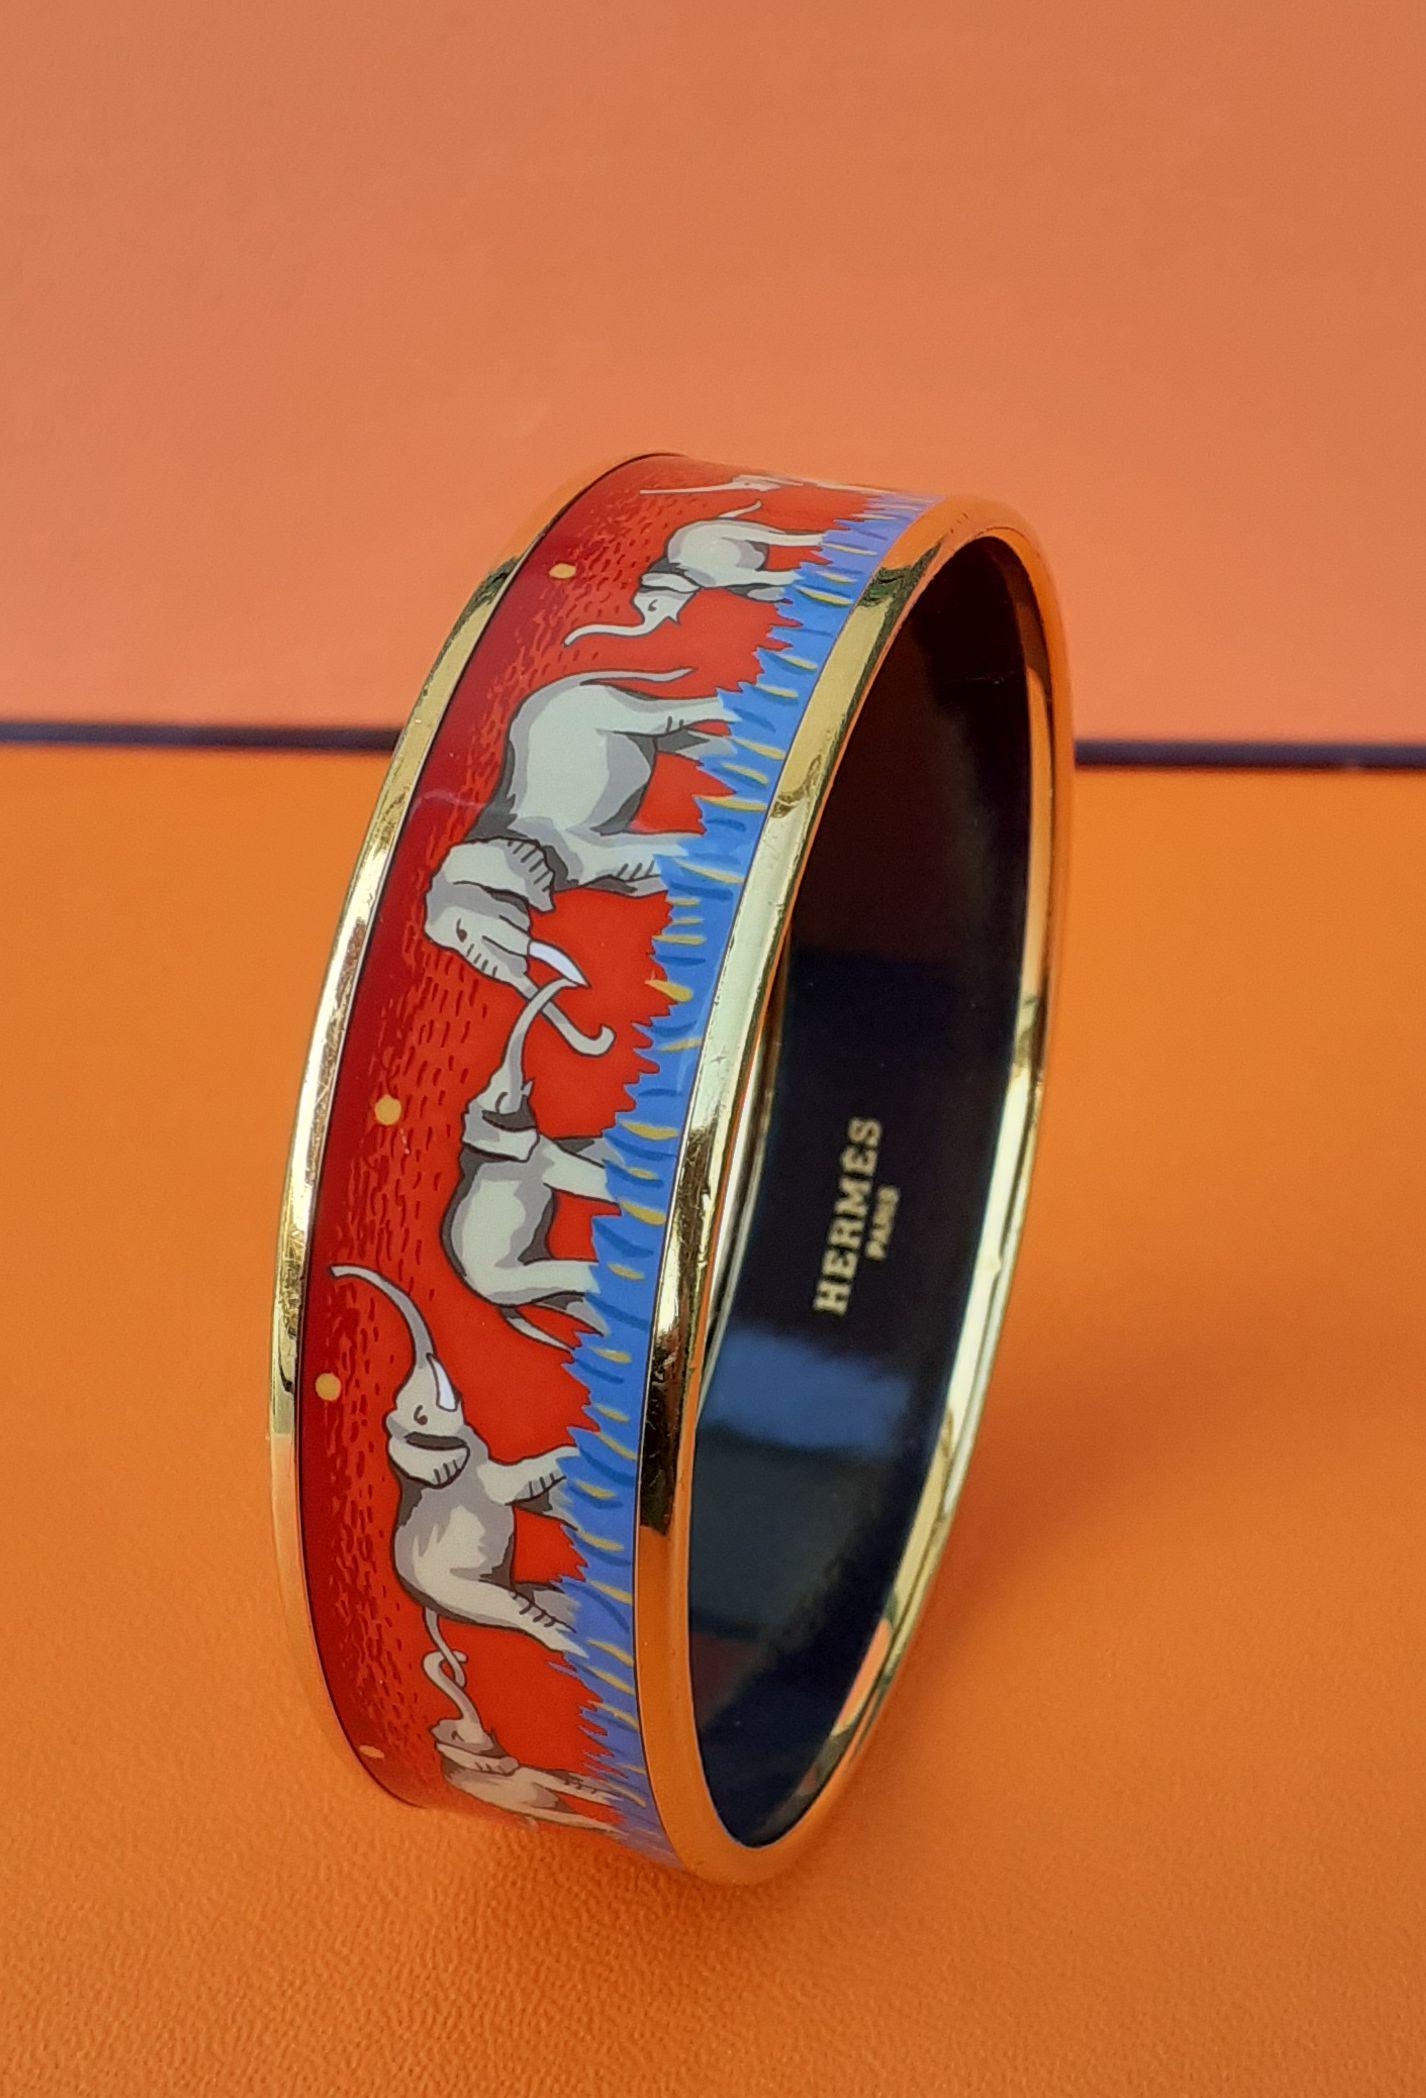 Gorgeous Authentic Hermès Bracelet

Pattern: Elephants Grazing

Hard to find ! One of the most thought after Hermès Bracelet. Rare in red !

Made in Austria + J

Made of printed Enamel and Gold Plated Hardware

Colorways: Red background with yellow